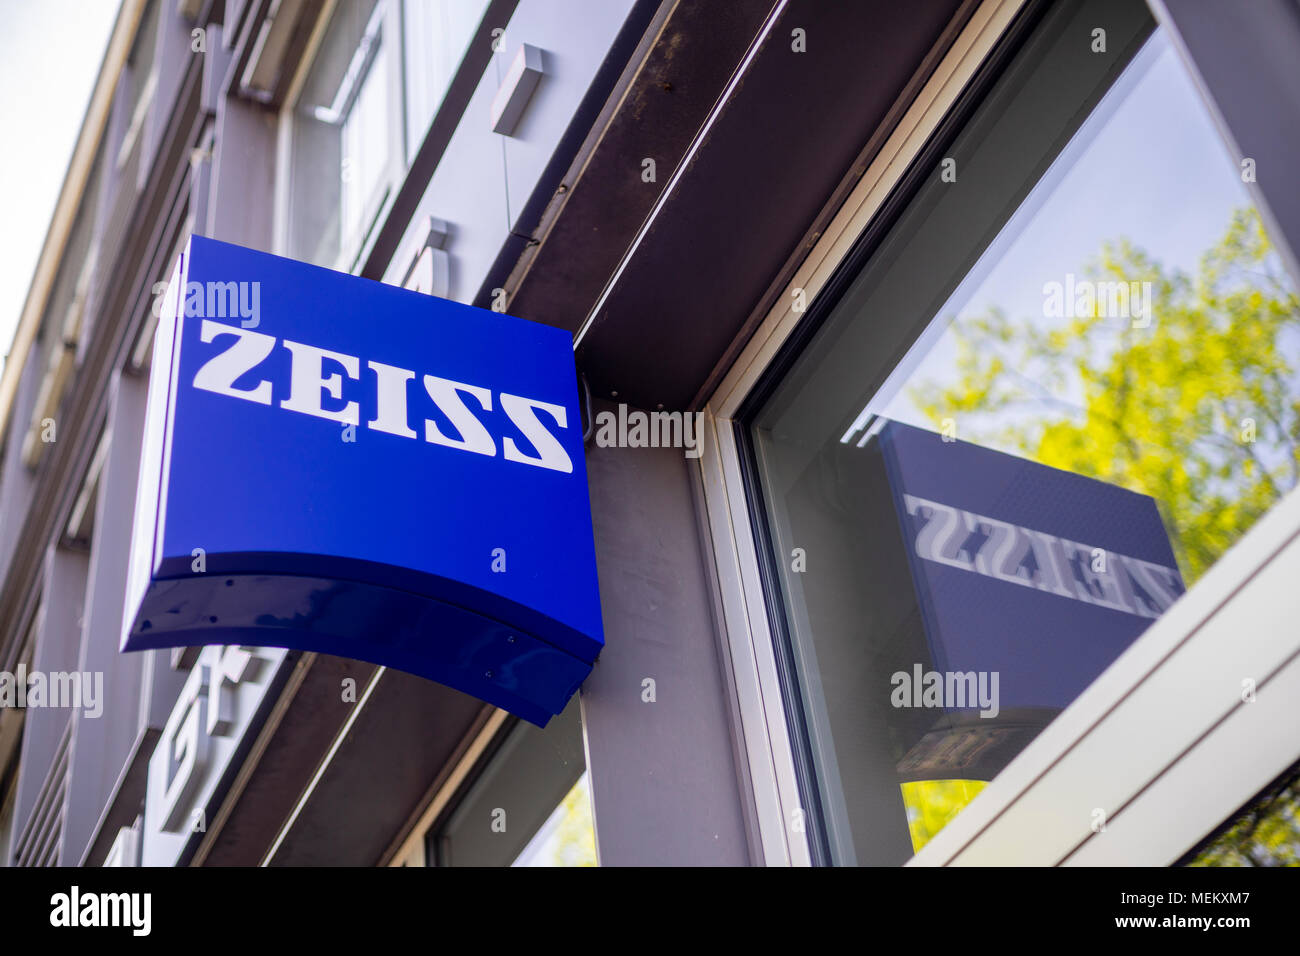 A Zeiss Optik (Carl Zeiss AG) shop sign in Germany Stock Photo